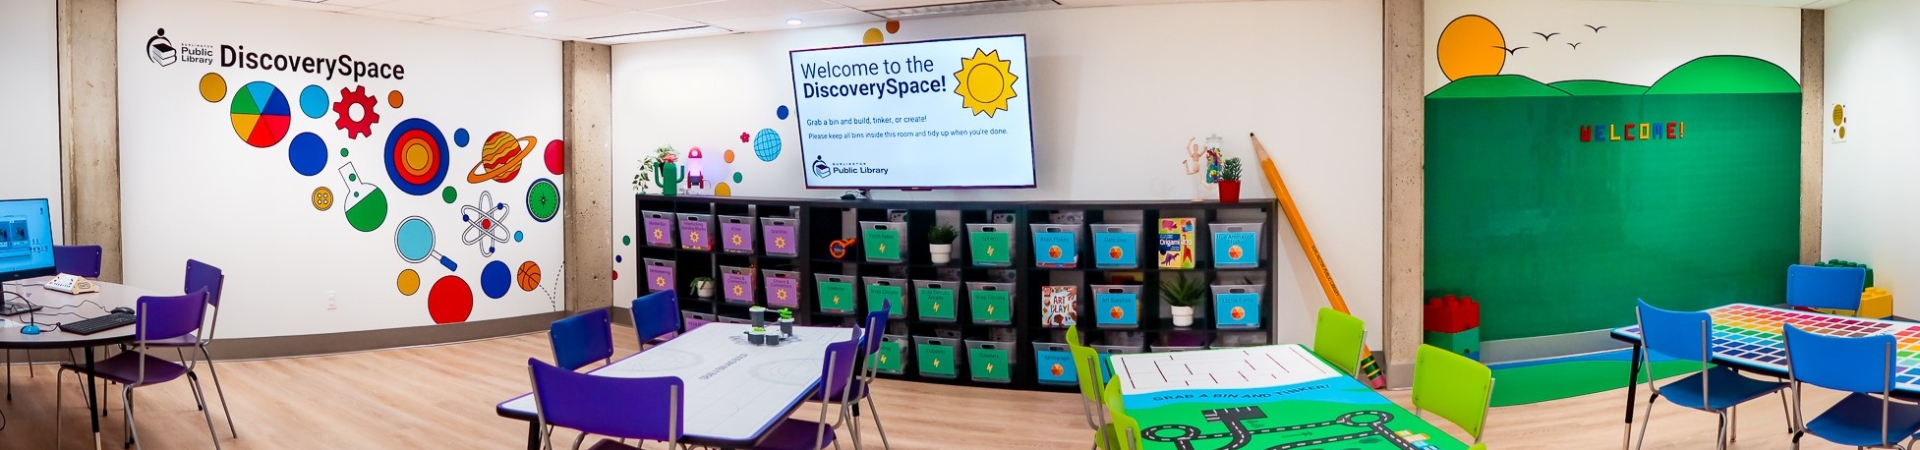 panorama of the DiscoverySpace showing four activity tables, self-directed activity bins, large tv screen, and LEGO wall